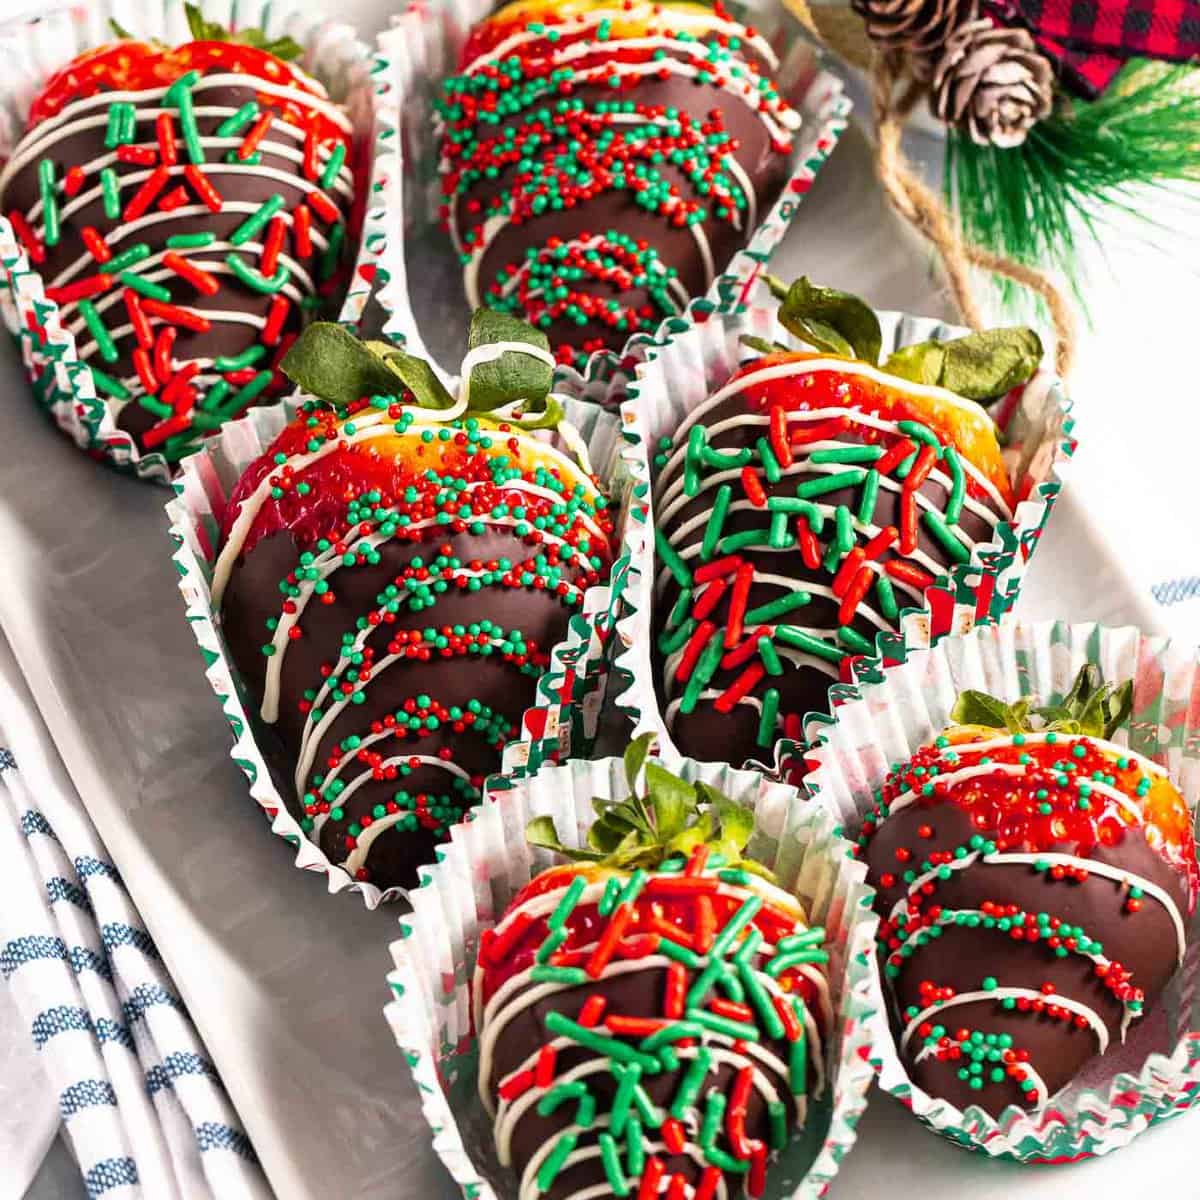 Christmas chocolate-covered strawberries with holiday sprinkles.